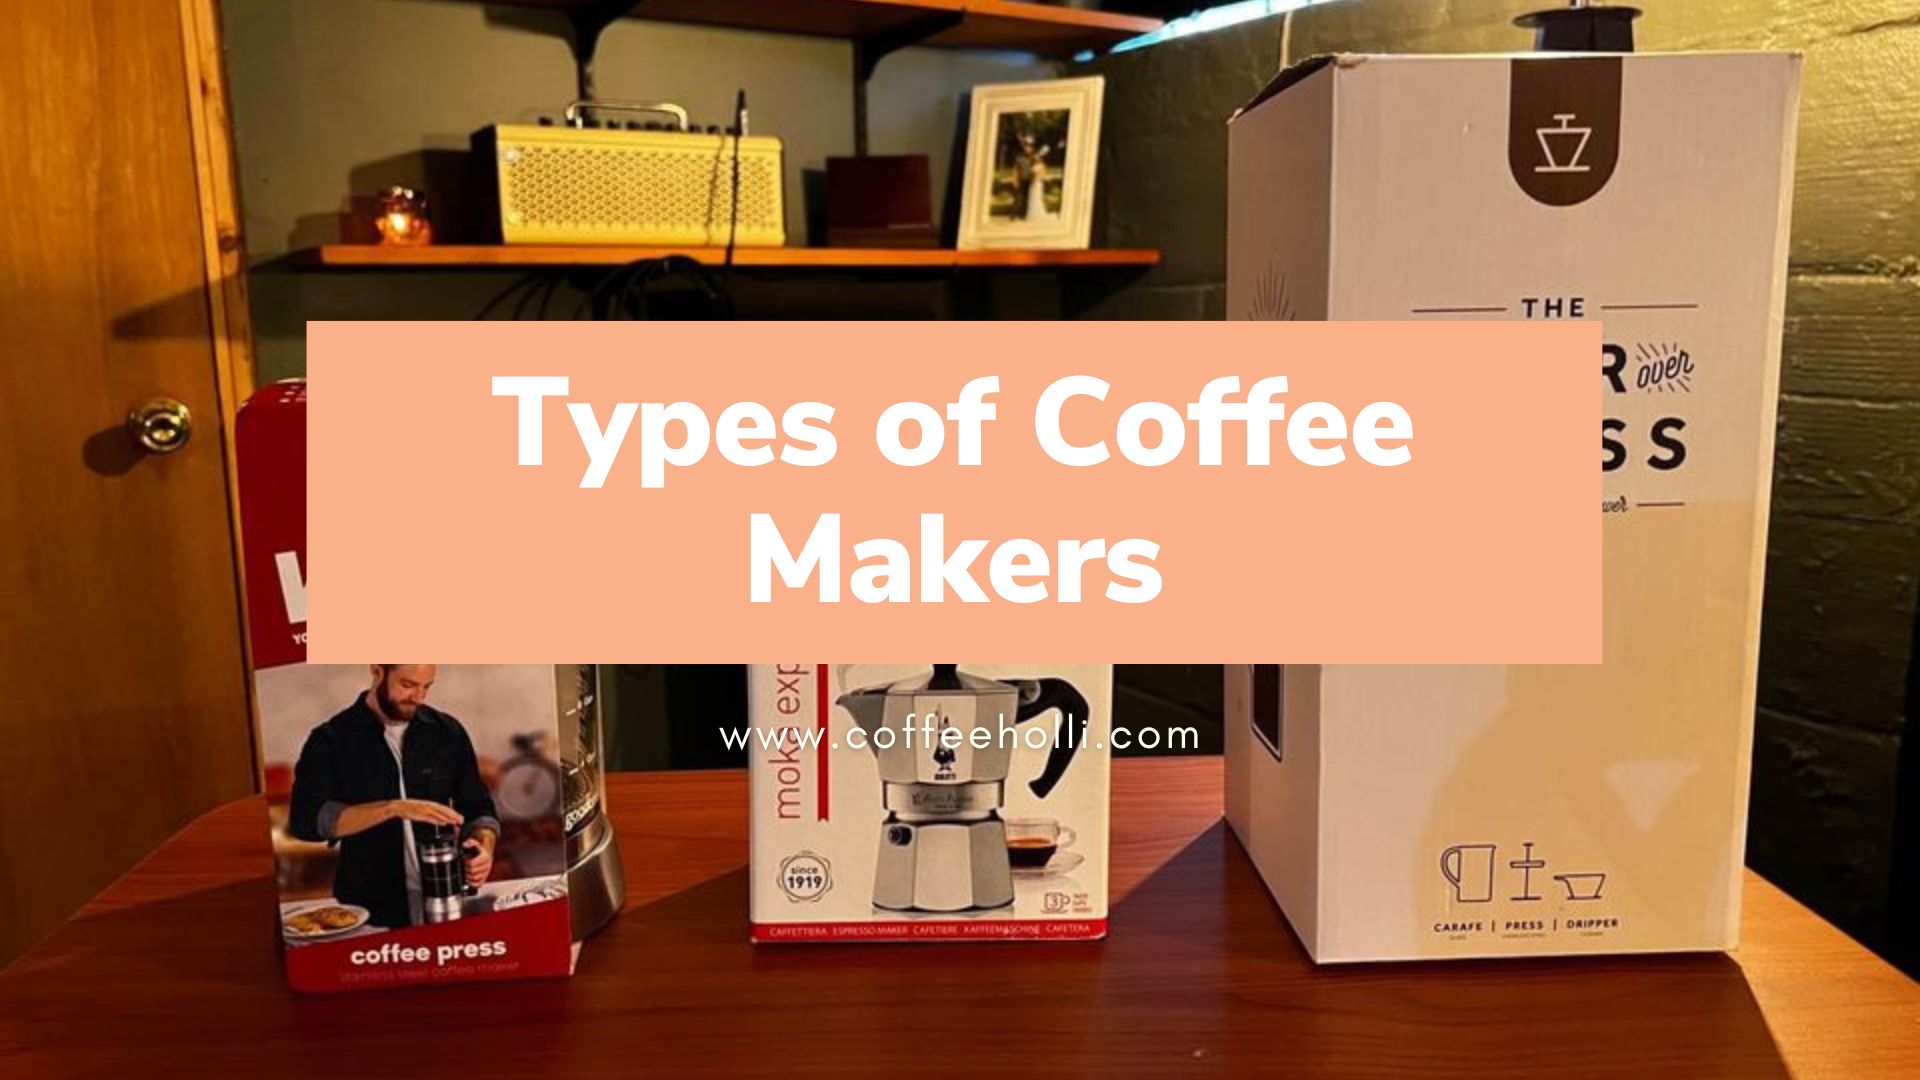 Types of Coffee Makers